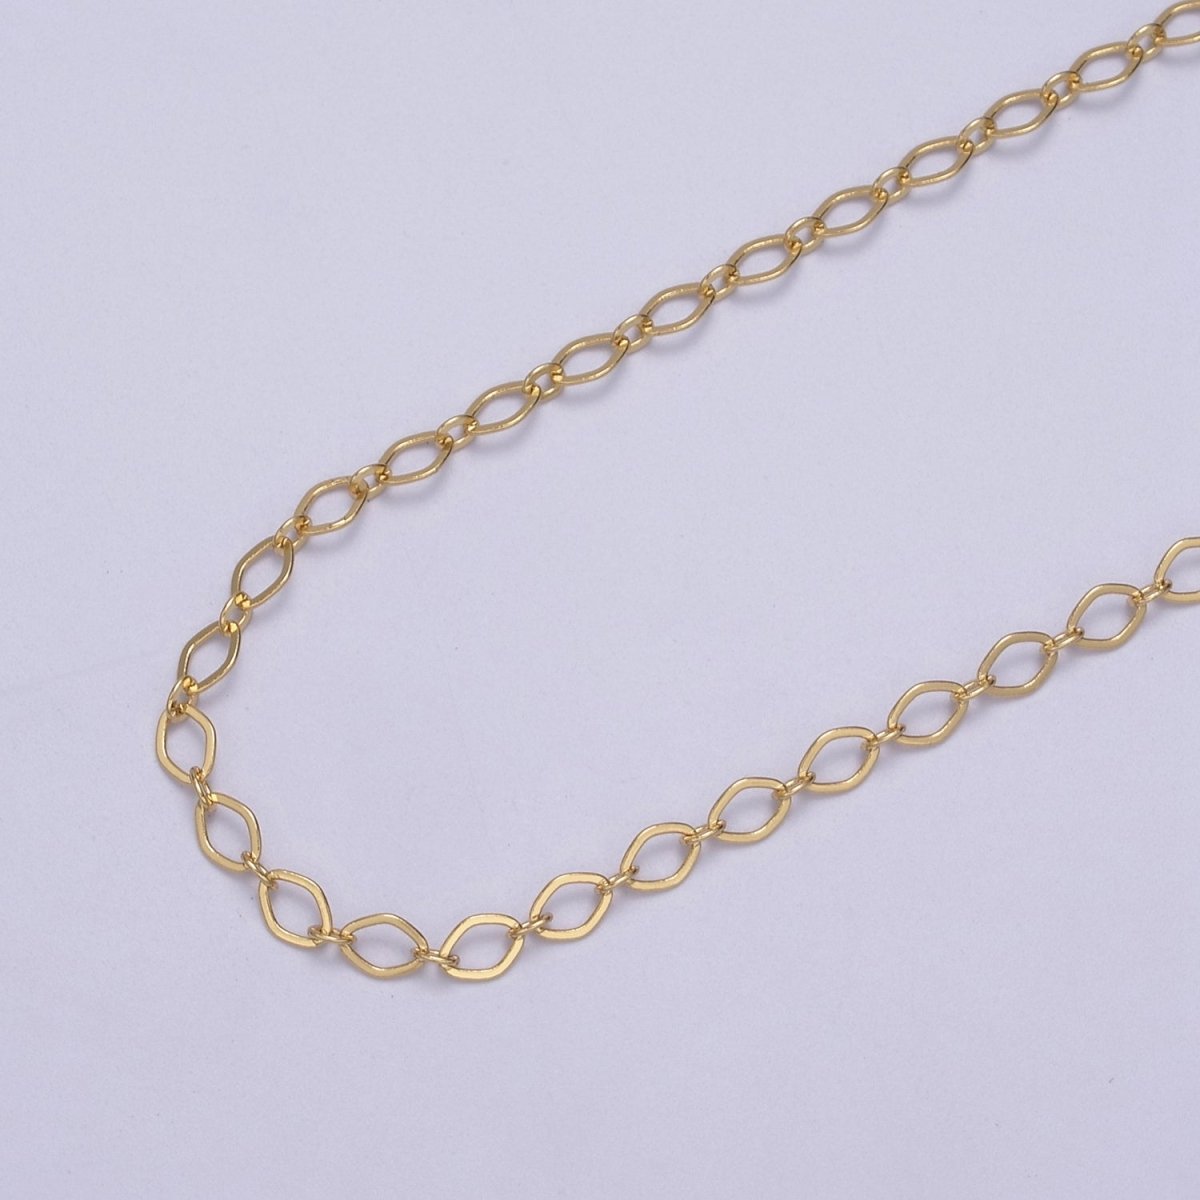 24k Gold Filled Gold Oval Rhombus Chain by Yard, Oval Link, Wholesale Bulk Roll Chain for Jewelry Making, Width 3.3mm | ROLL-611 ROLL-612 - DLUXCA